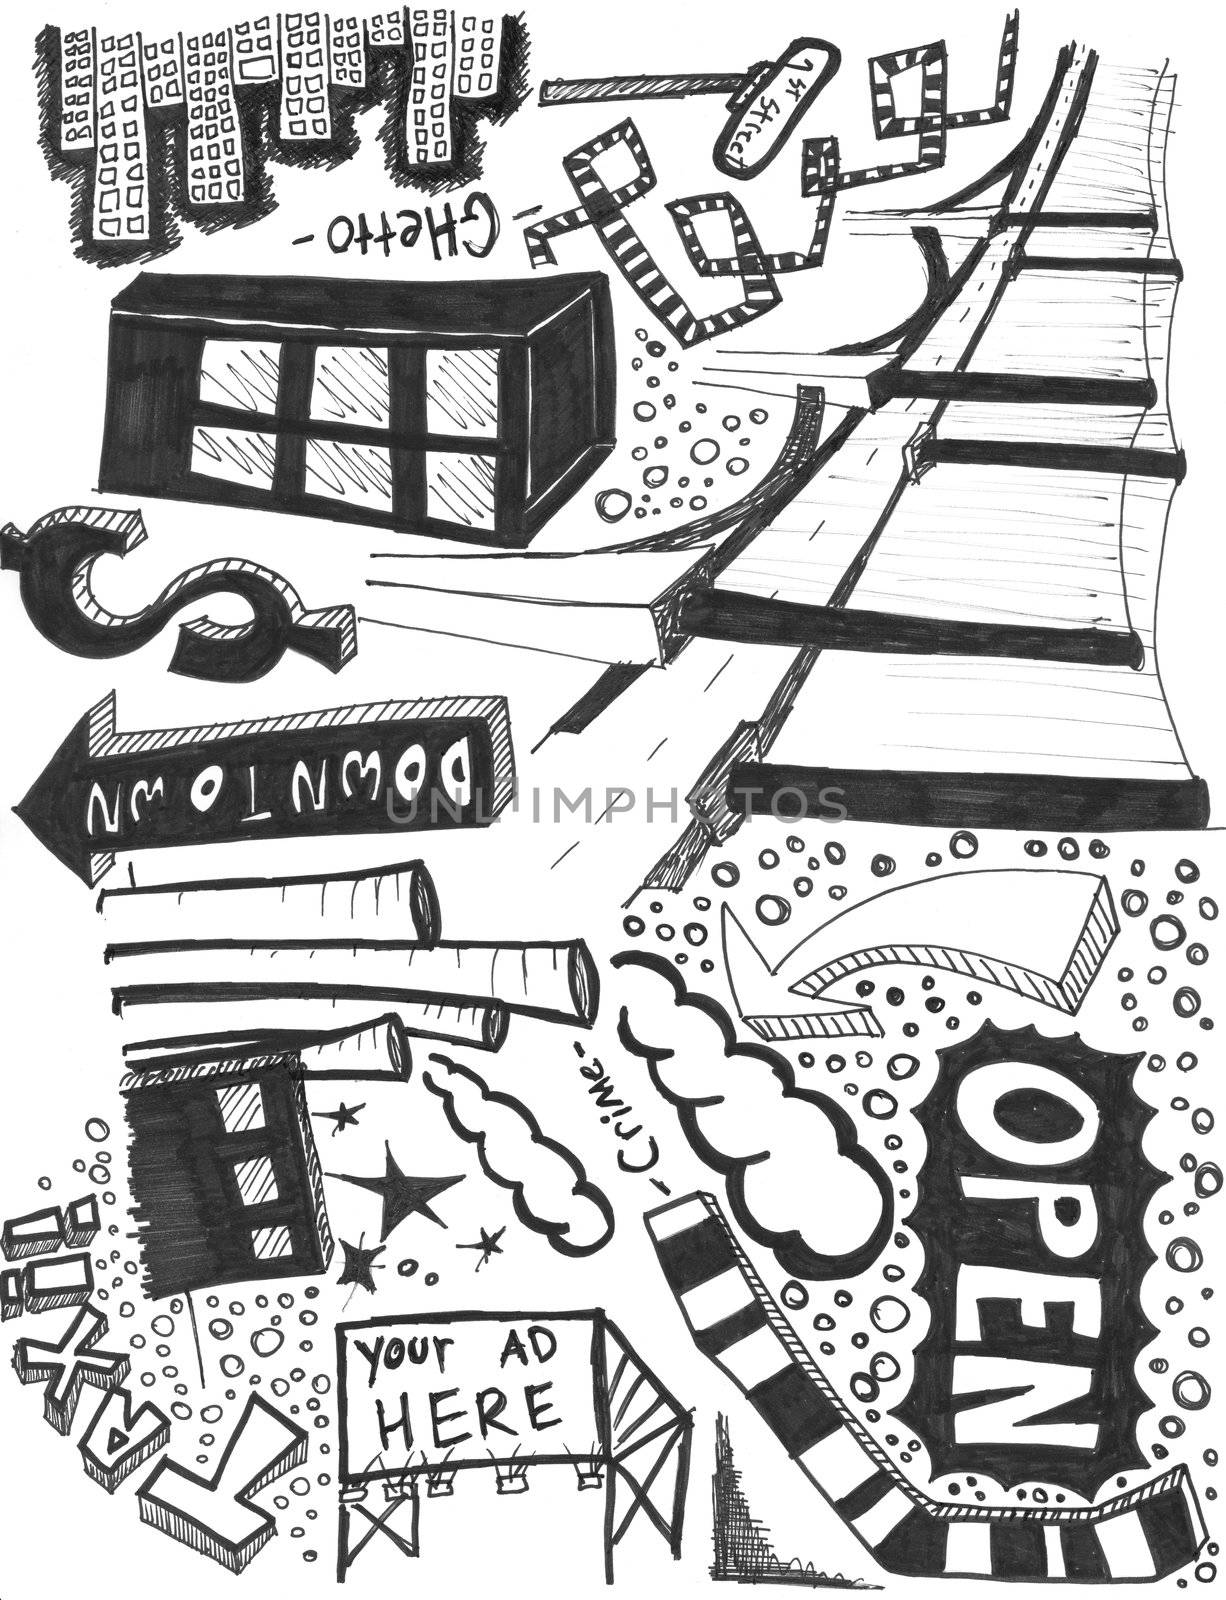 hand drawn doodles design elements scetch scribbles drawing by jeremywhat